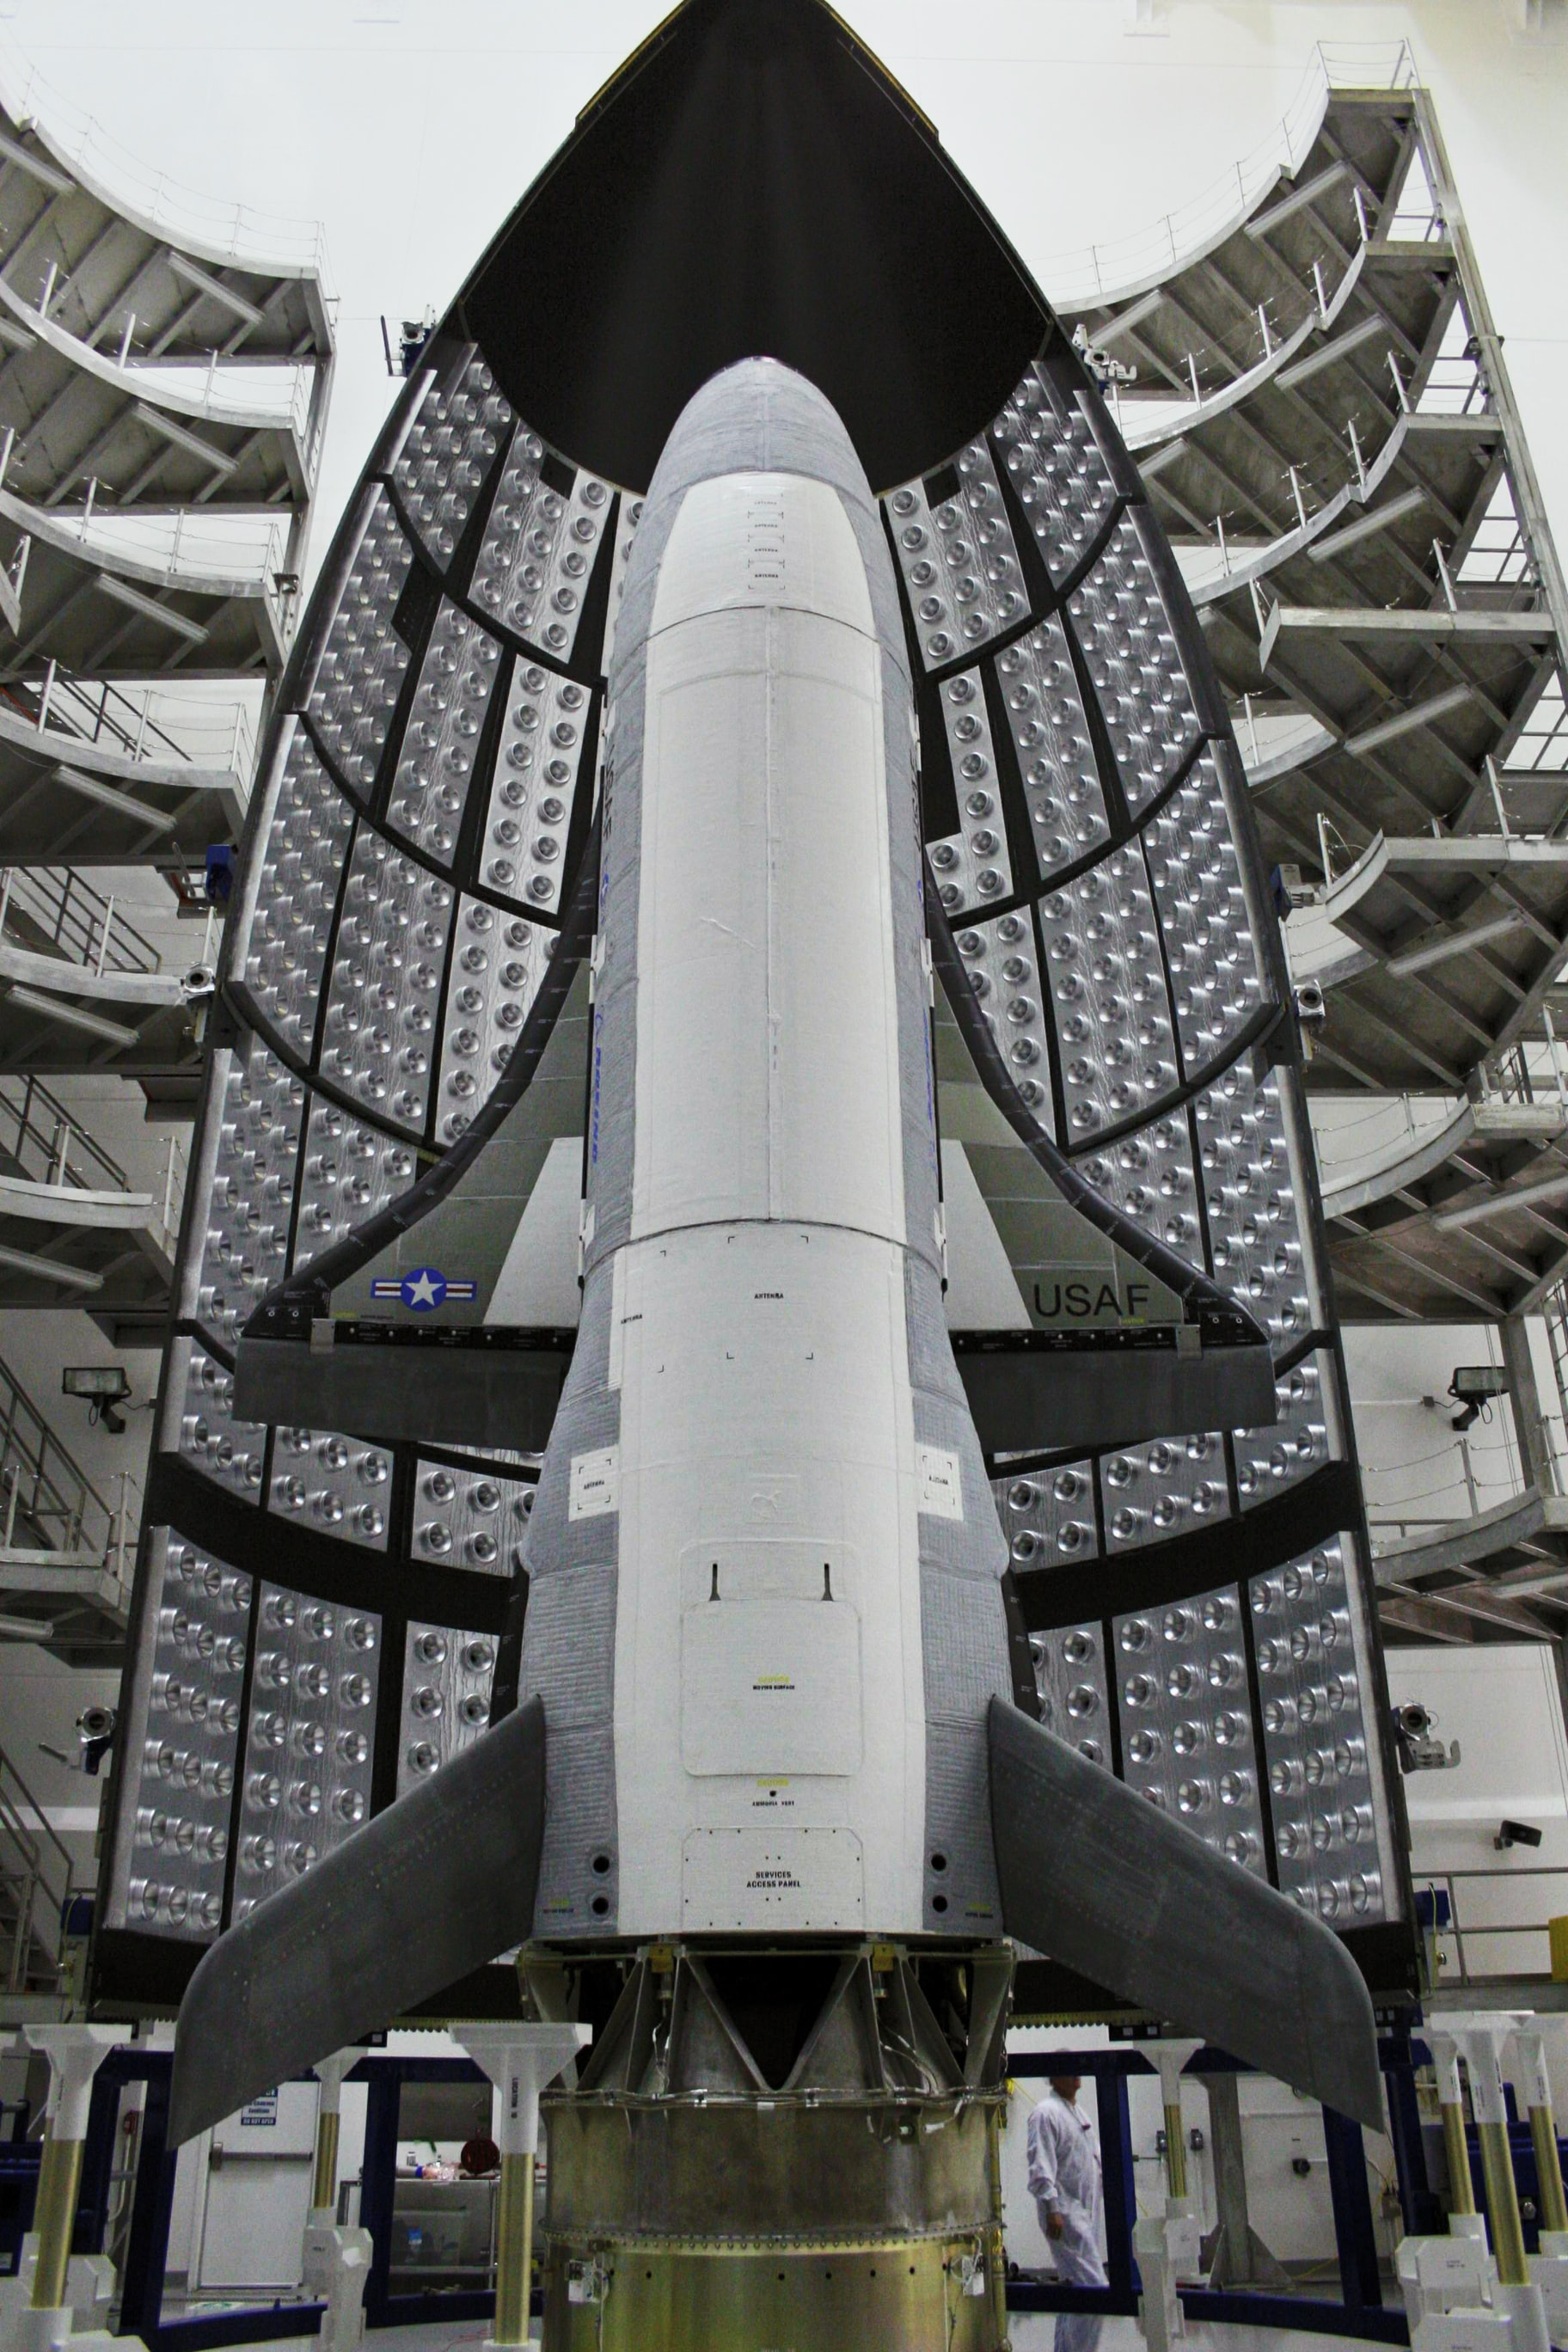 Boeing_X-37B_inside_payload_fairing_before_launch